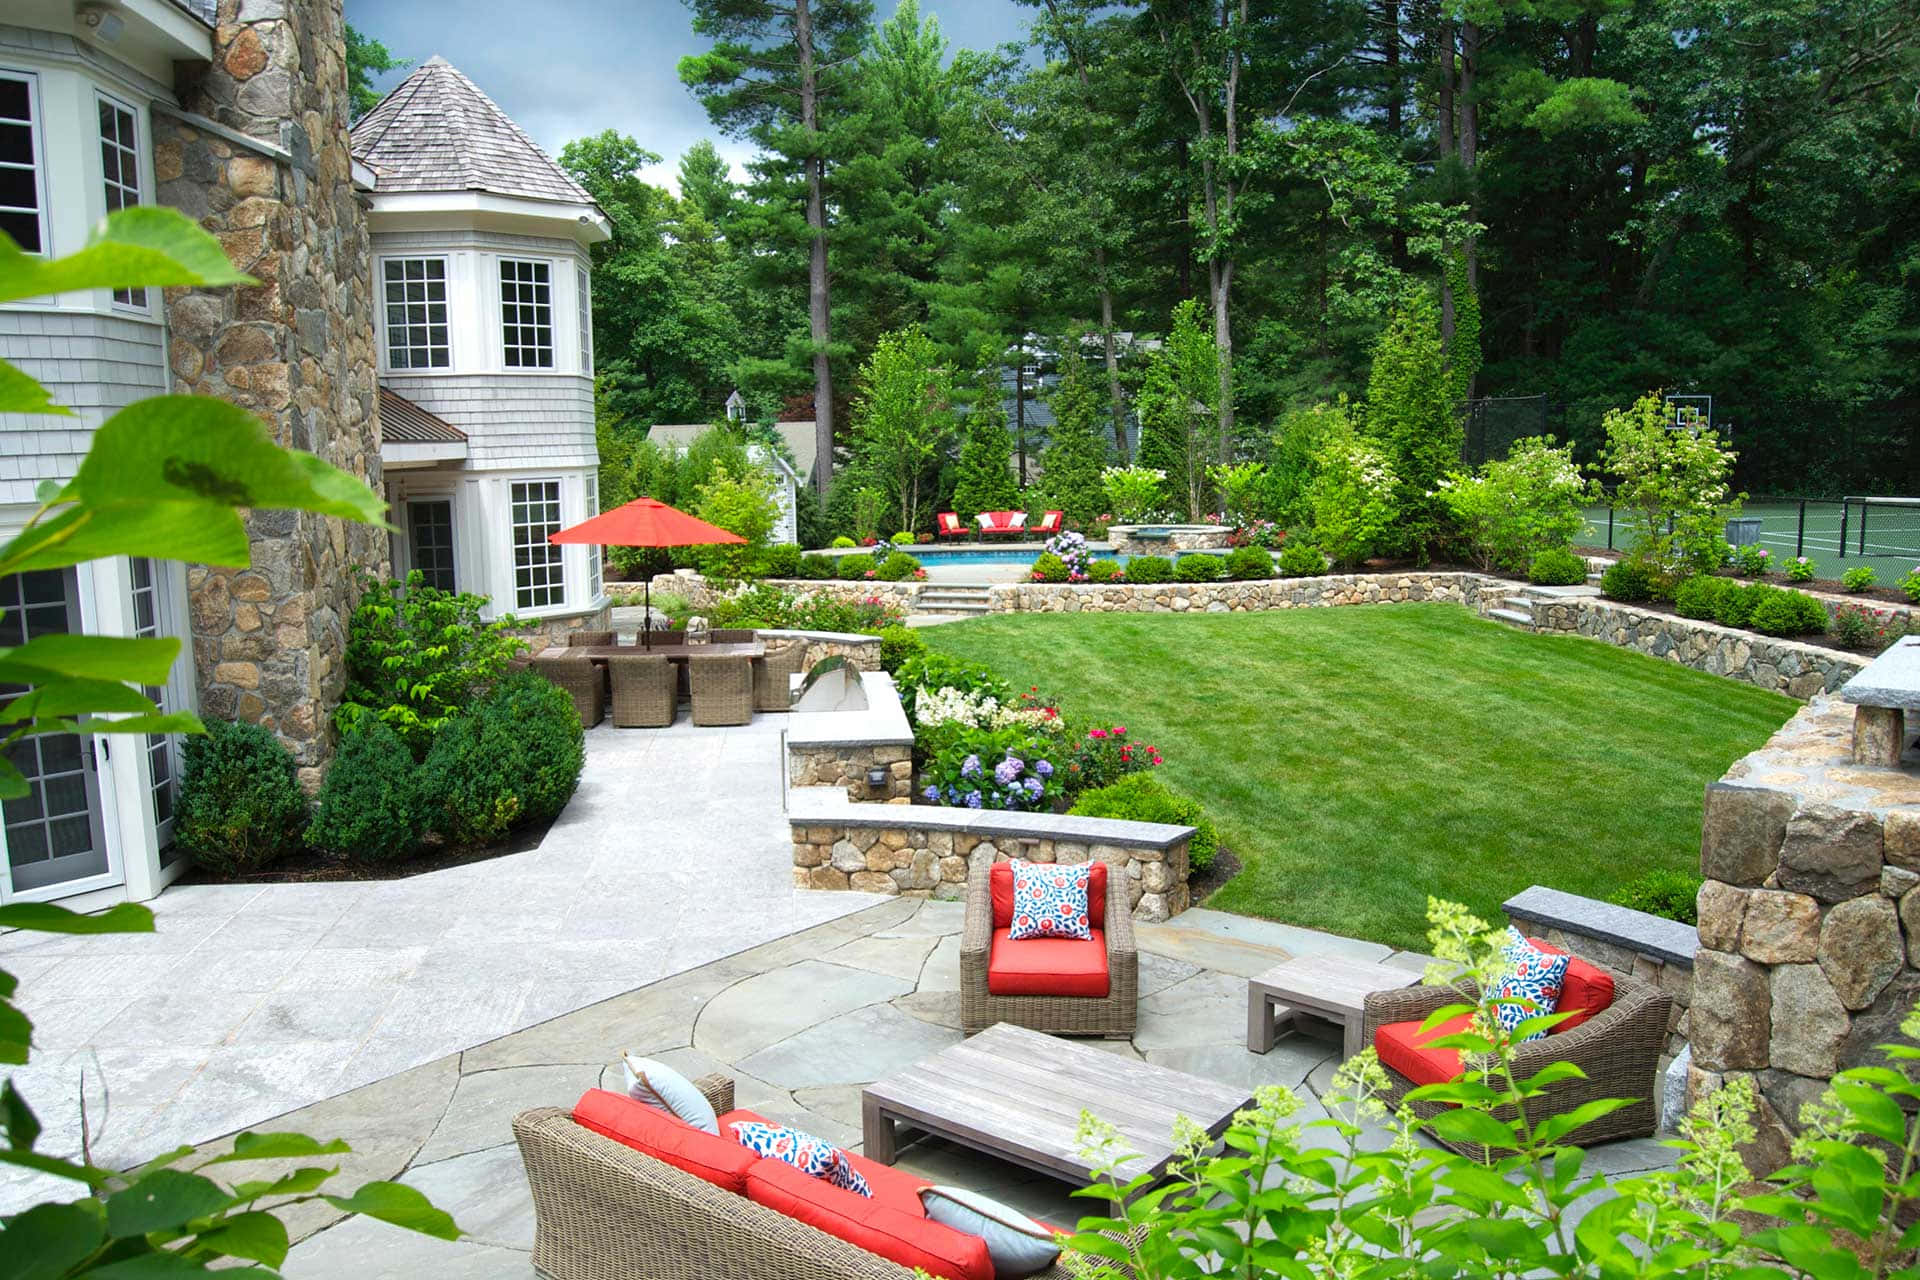 Stunning Landscape Design with Lush Greenery and Serene Pathways